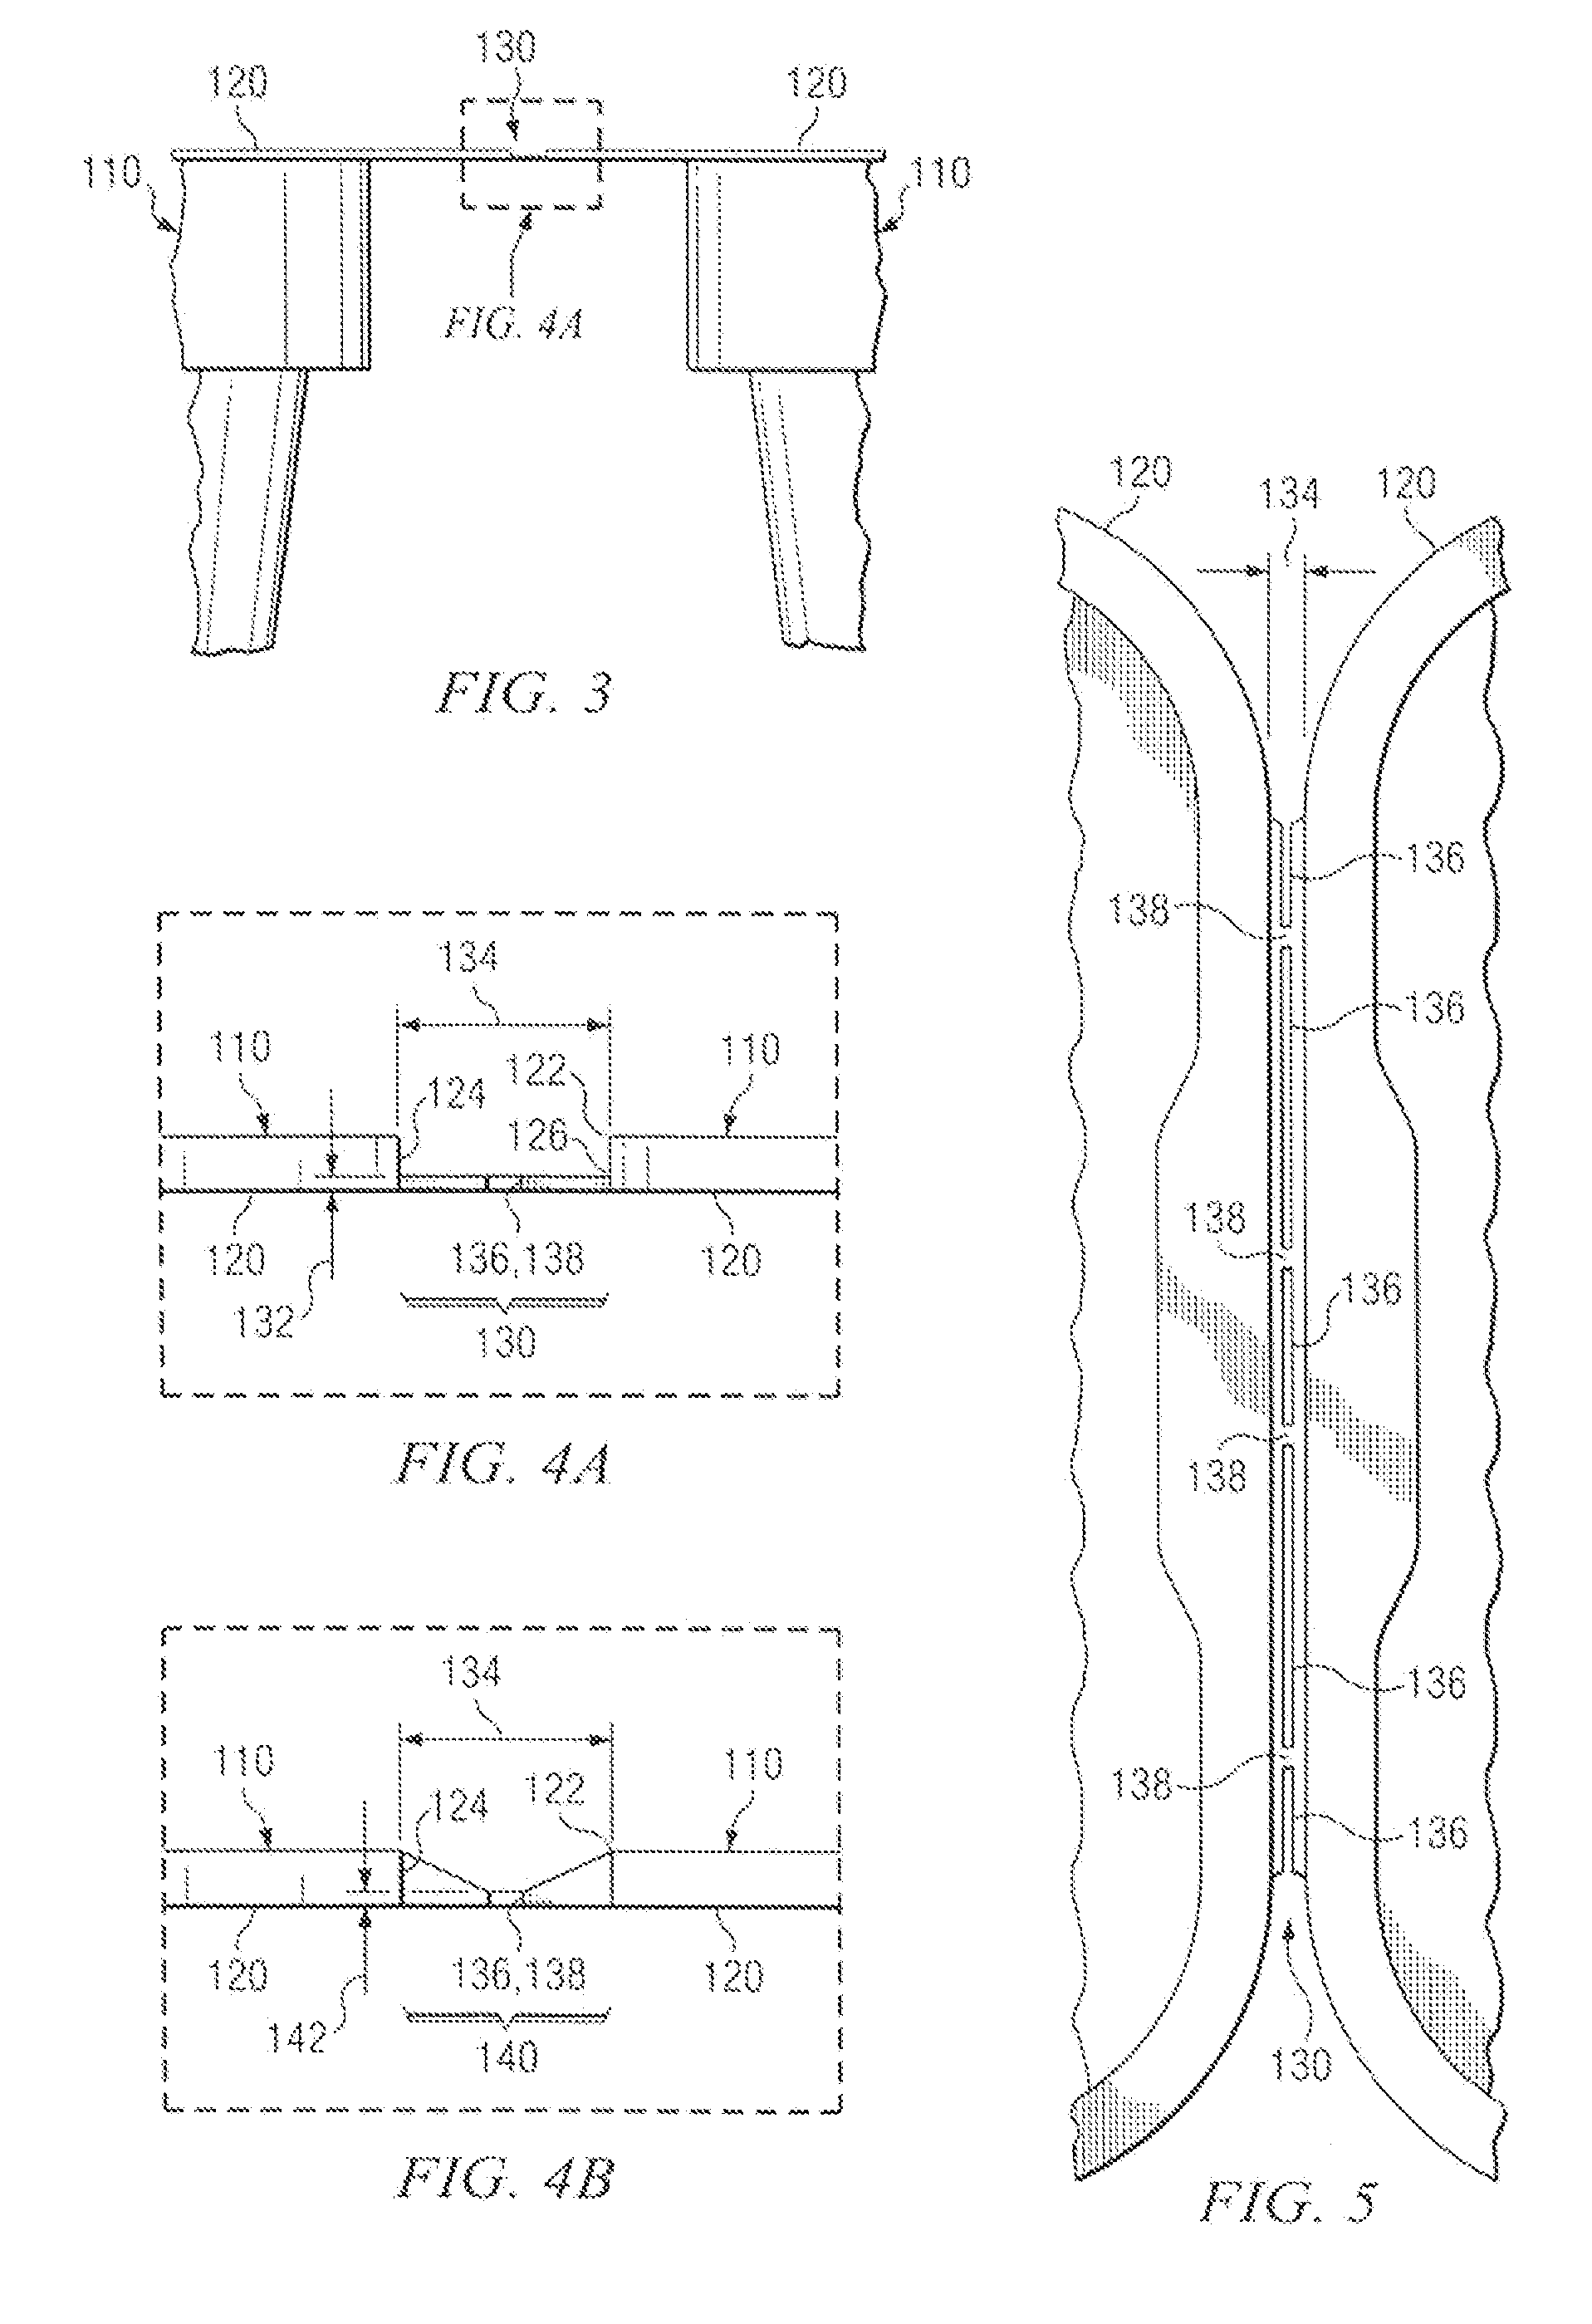 Method for Producing a Detachably Connected Container Having Barrier Properties